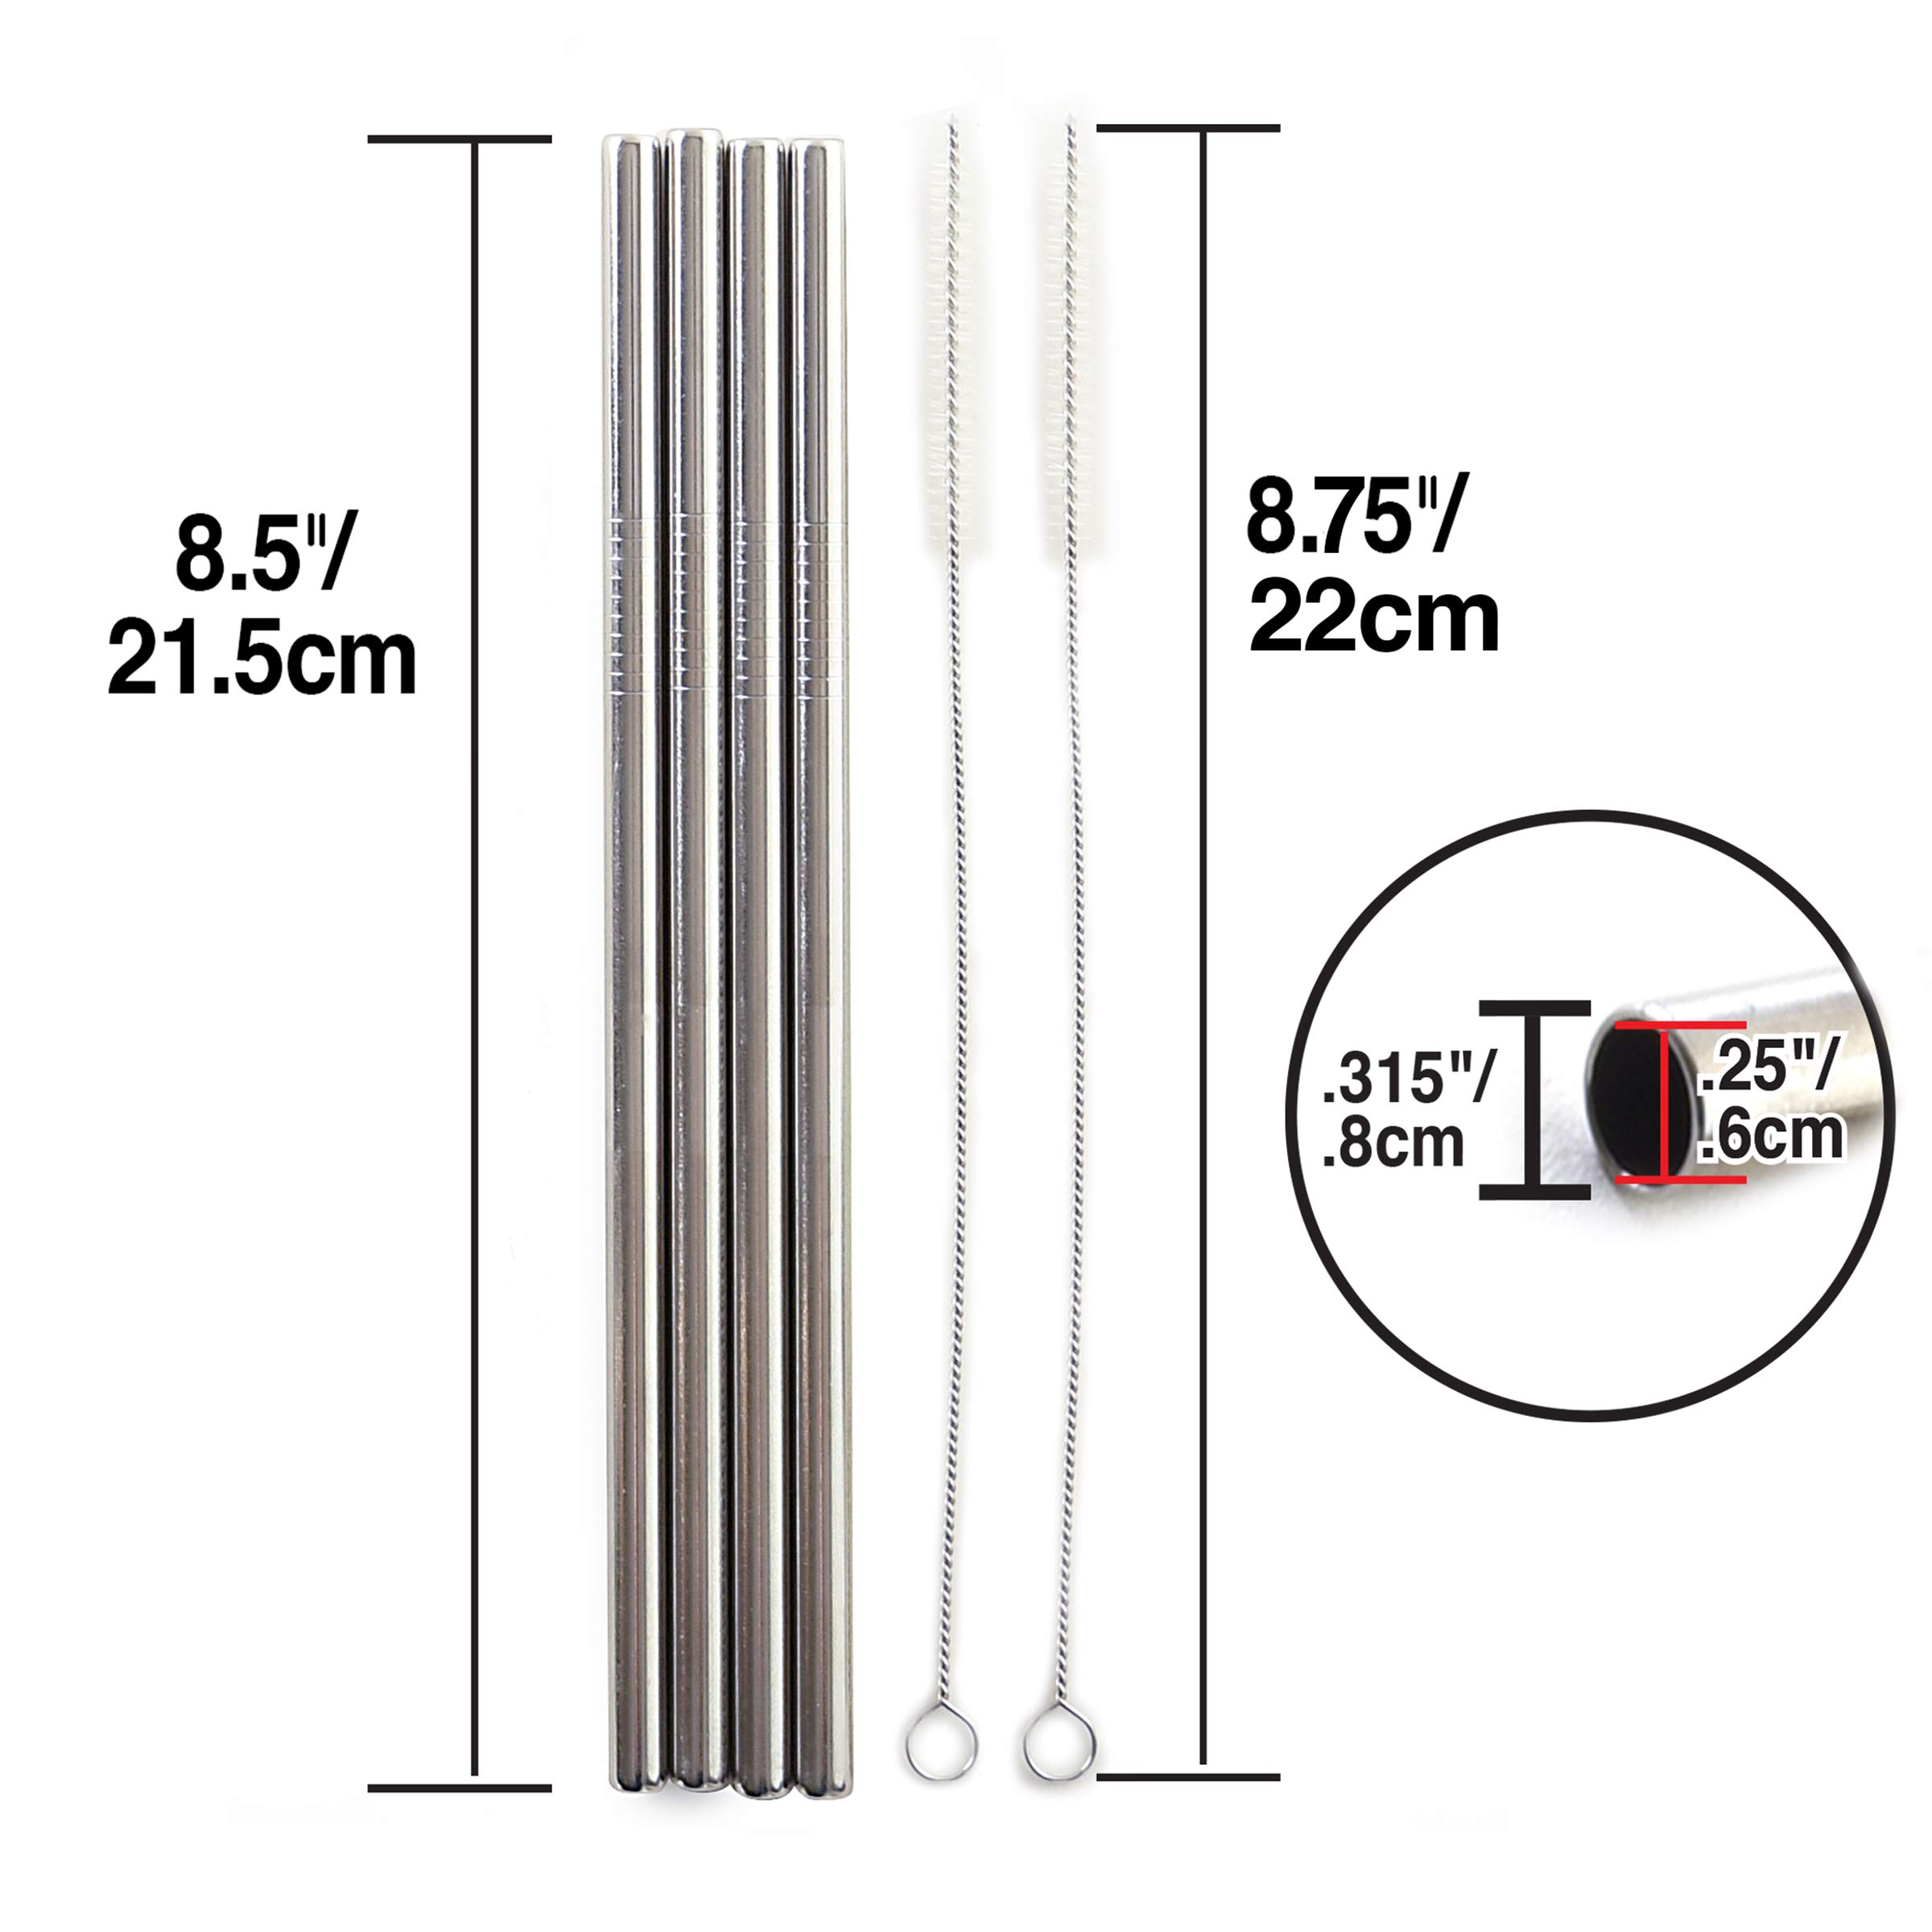 Norpro Stainless Steel Drinking Straws with 2 Cleaning Brushes